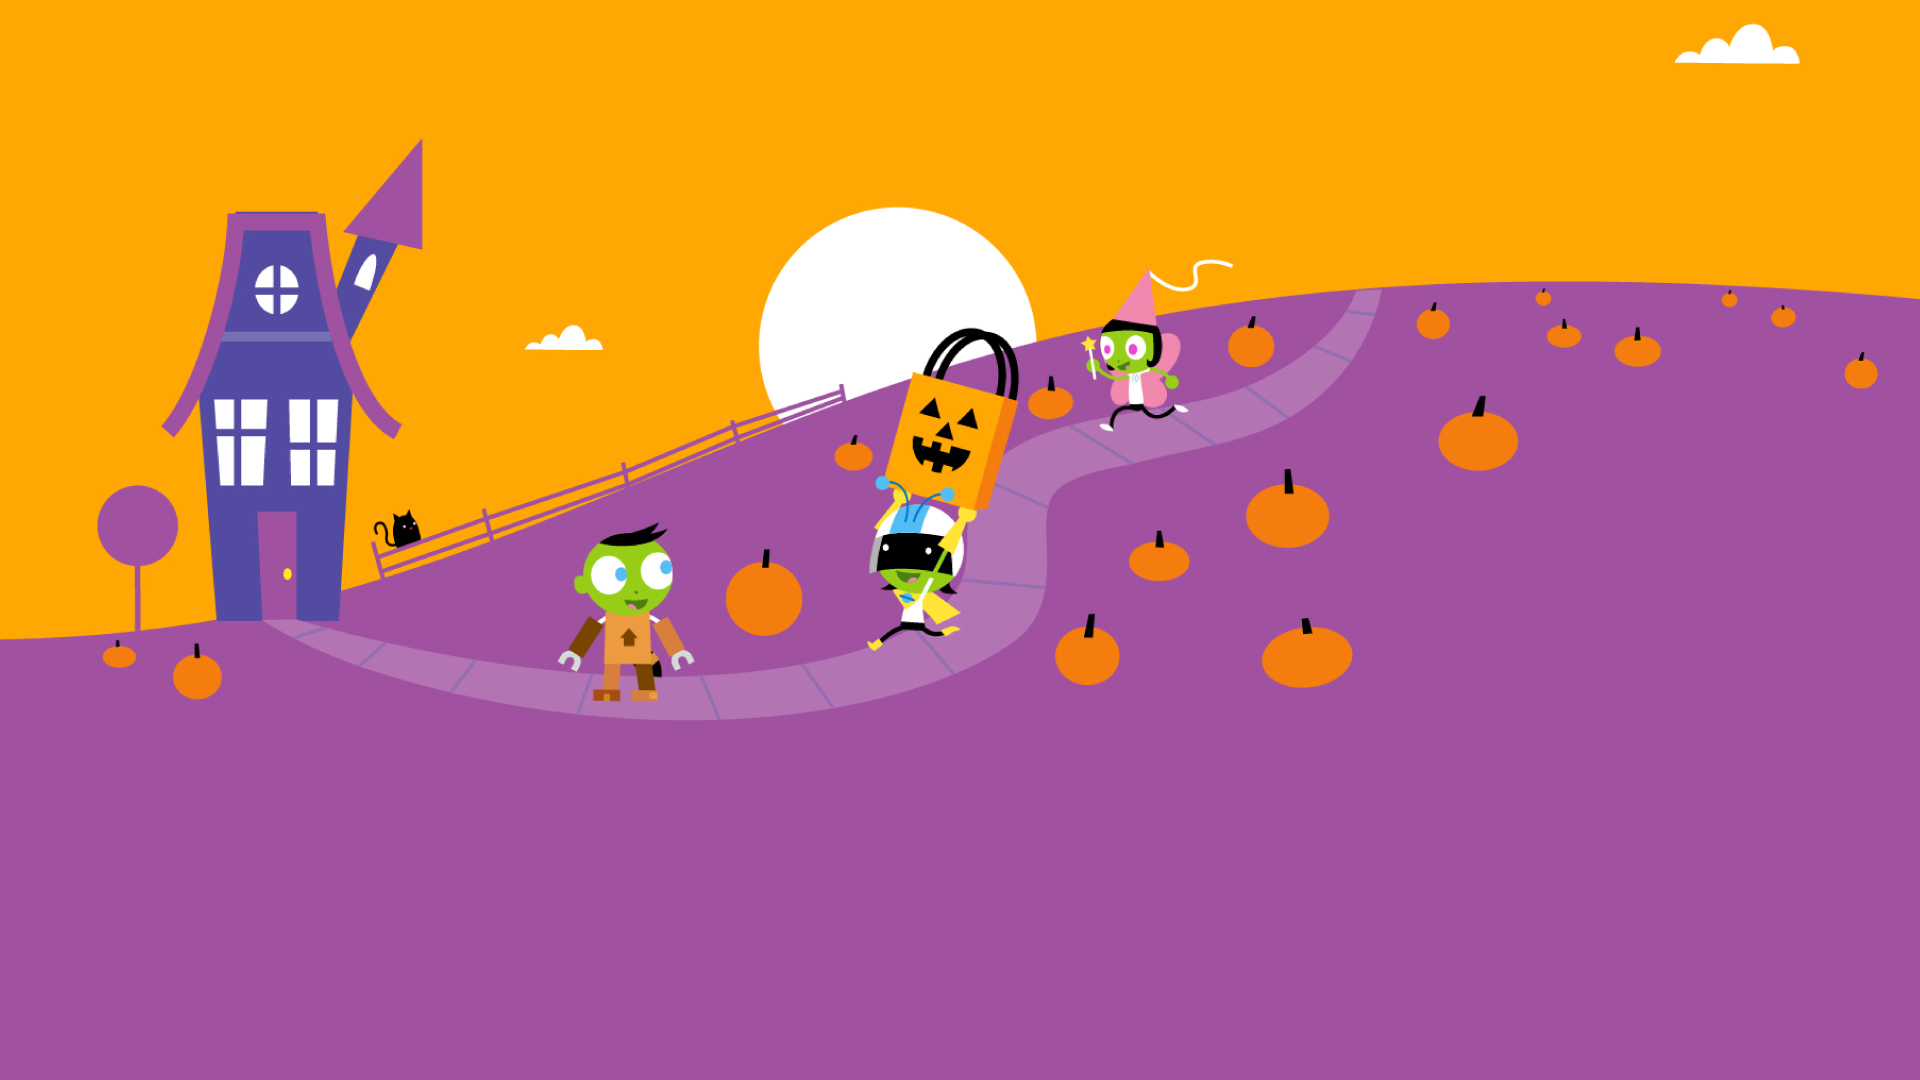 Illustration of the PBS KIDS characters Dee, Dot and Del going trick-or-treating on a path surrounded by pumpkins